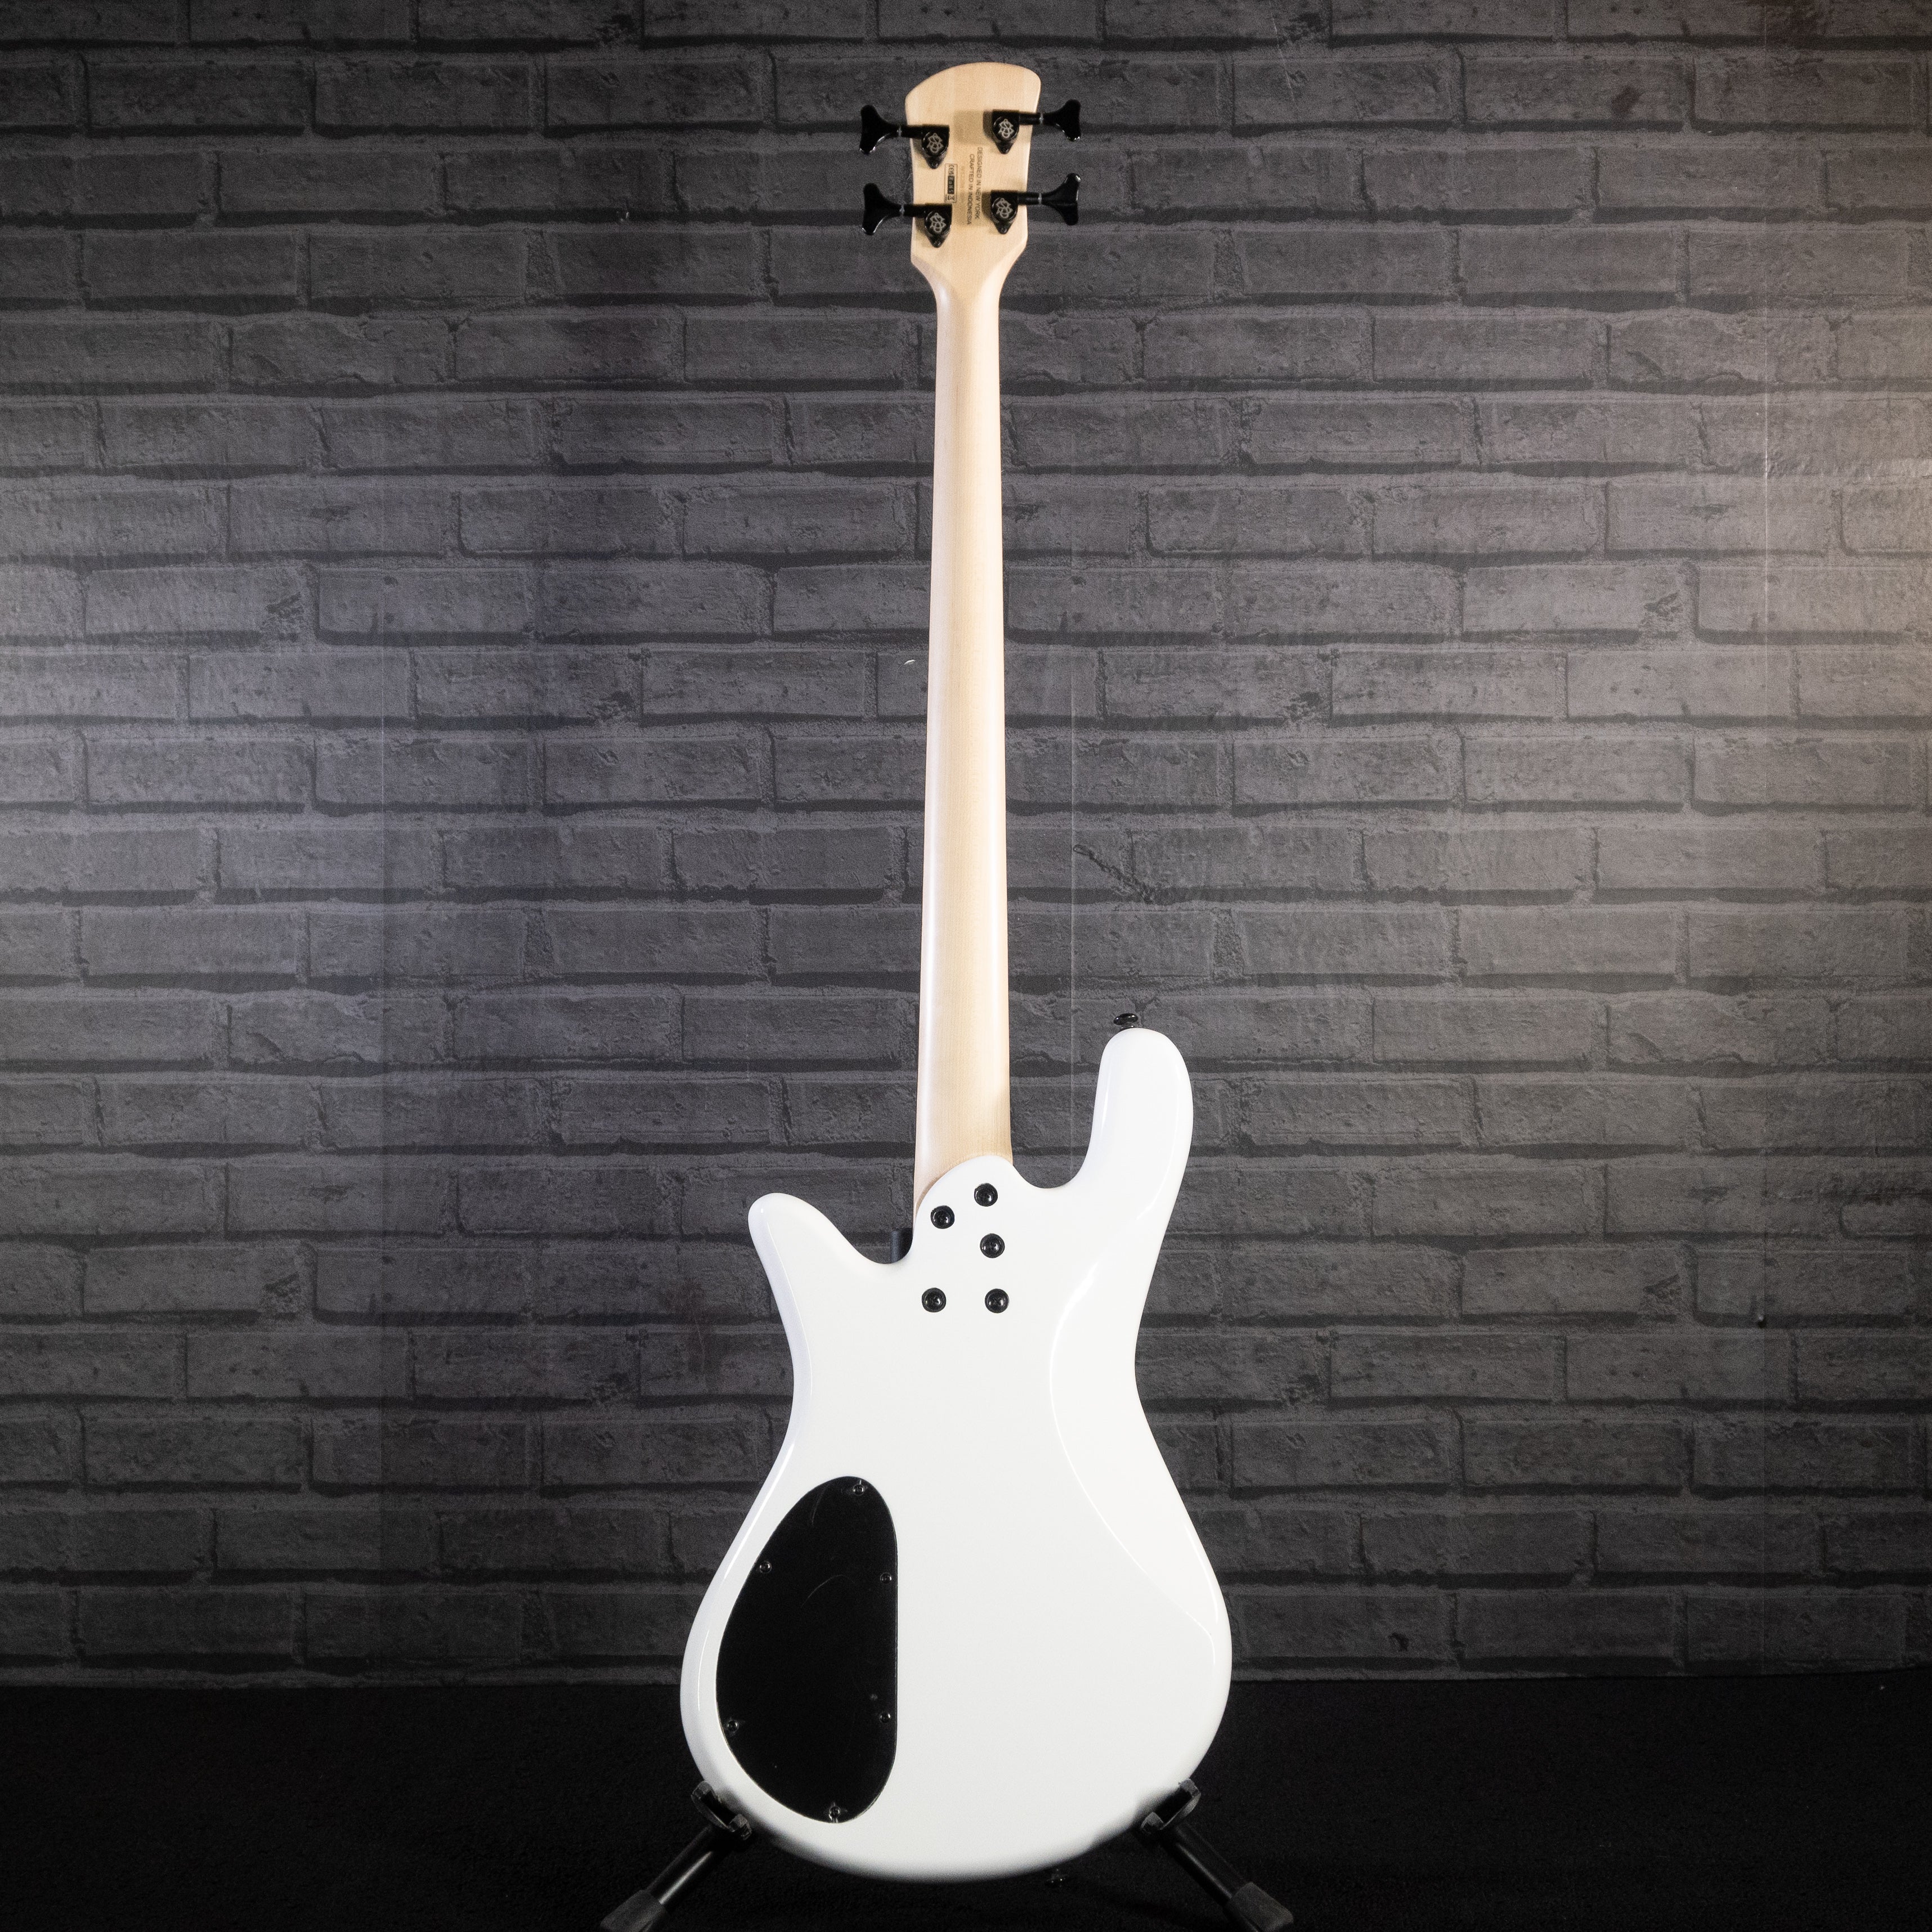 Spector Performer 4 Bass Guitar (Solid White)